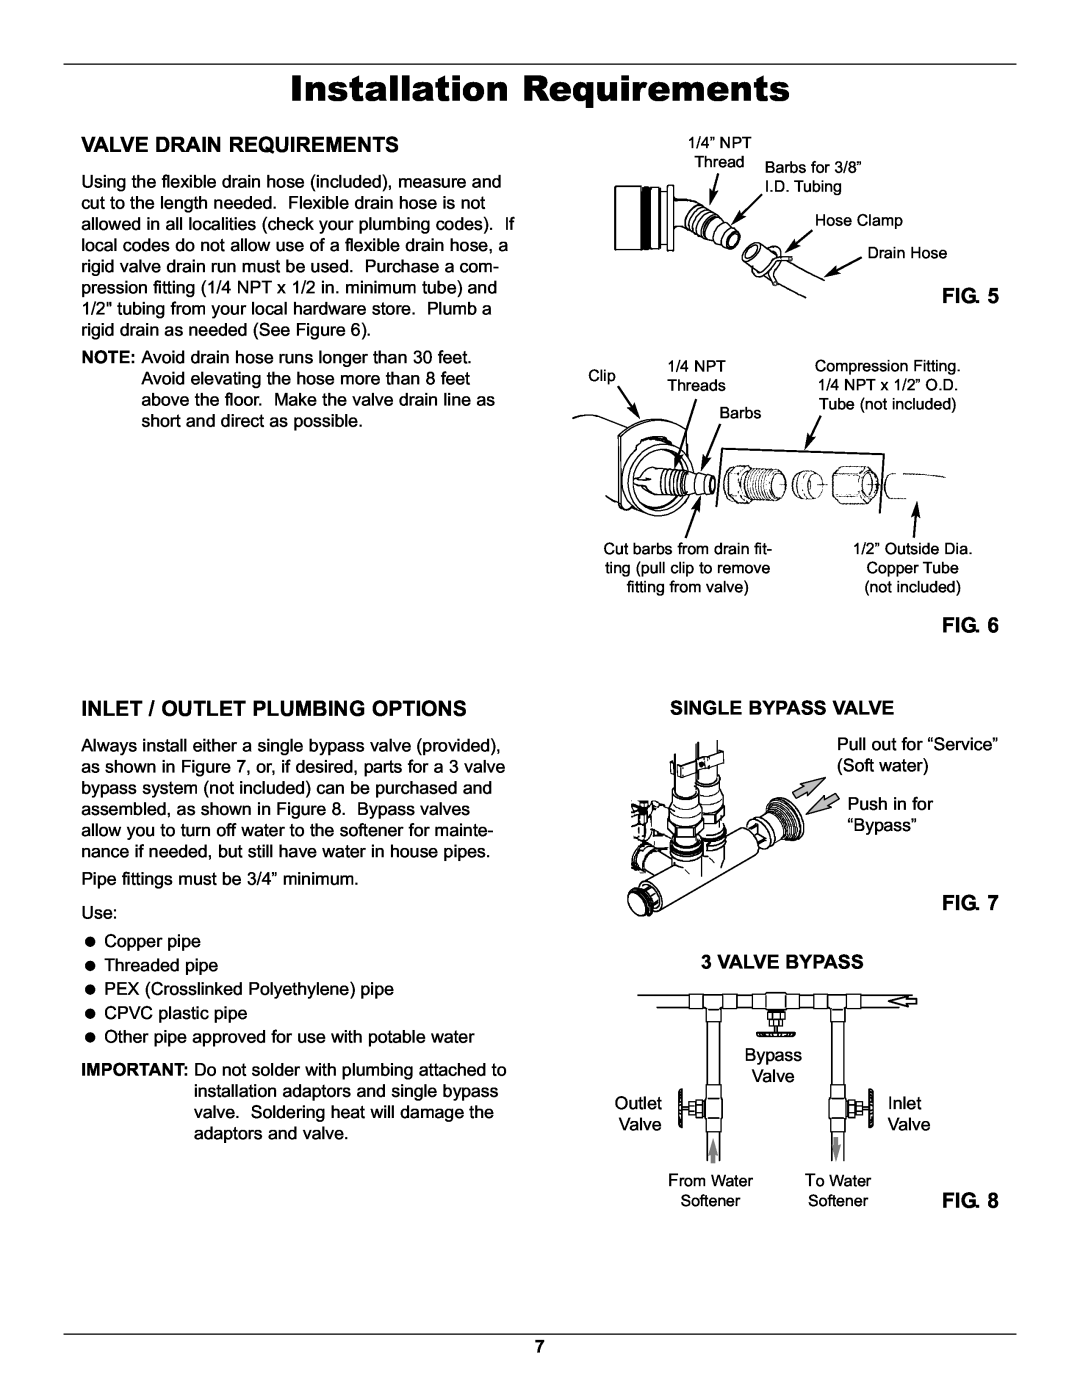 Whirlpool WHES48 Valve Drain Requirements, Inlet / Outlet Plumbing Options, Single Bypass Valve, Valve Bypass, Fig 